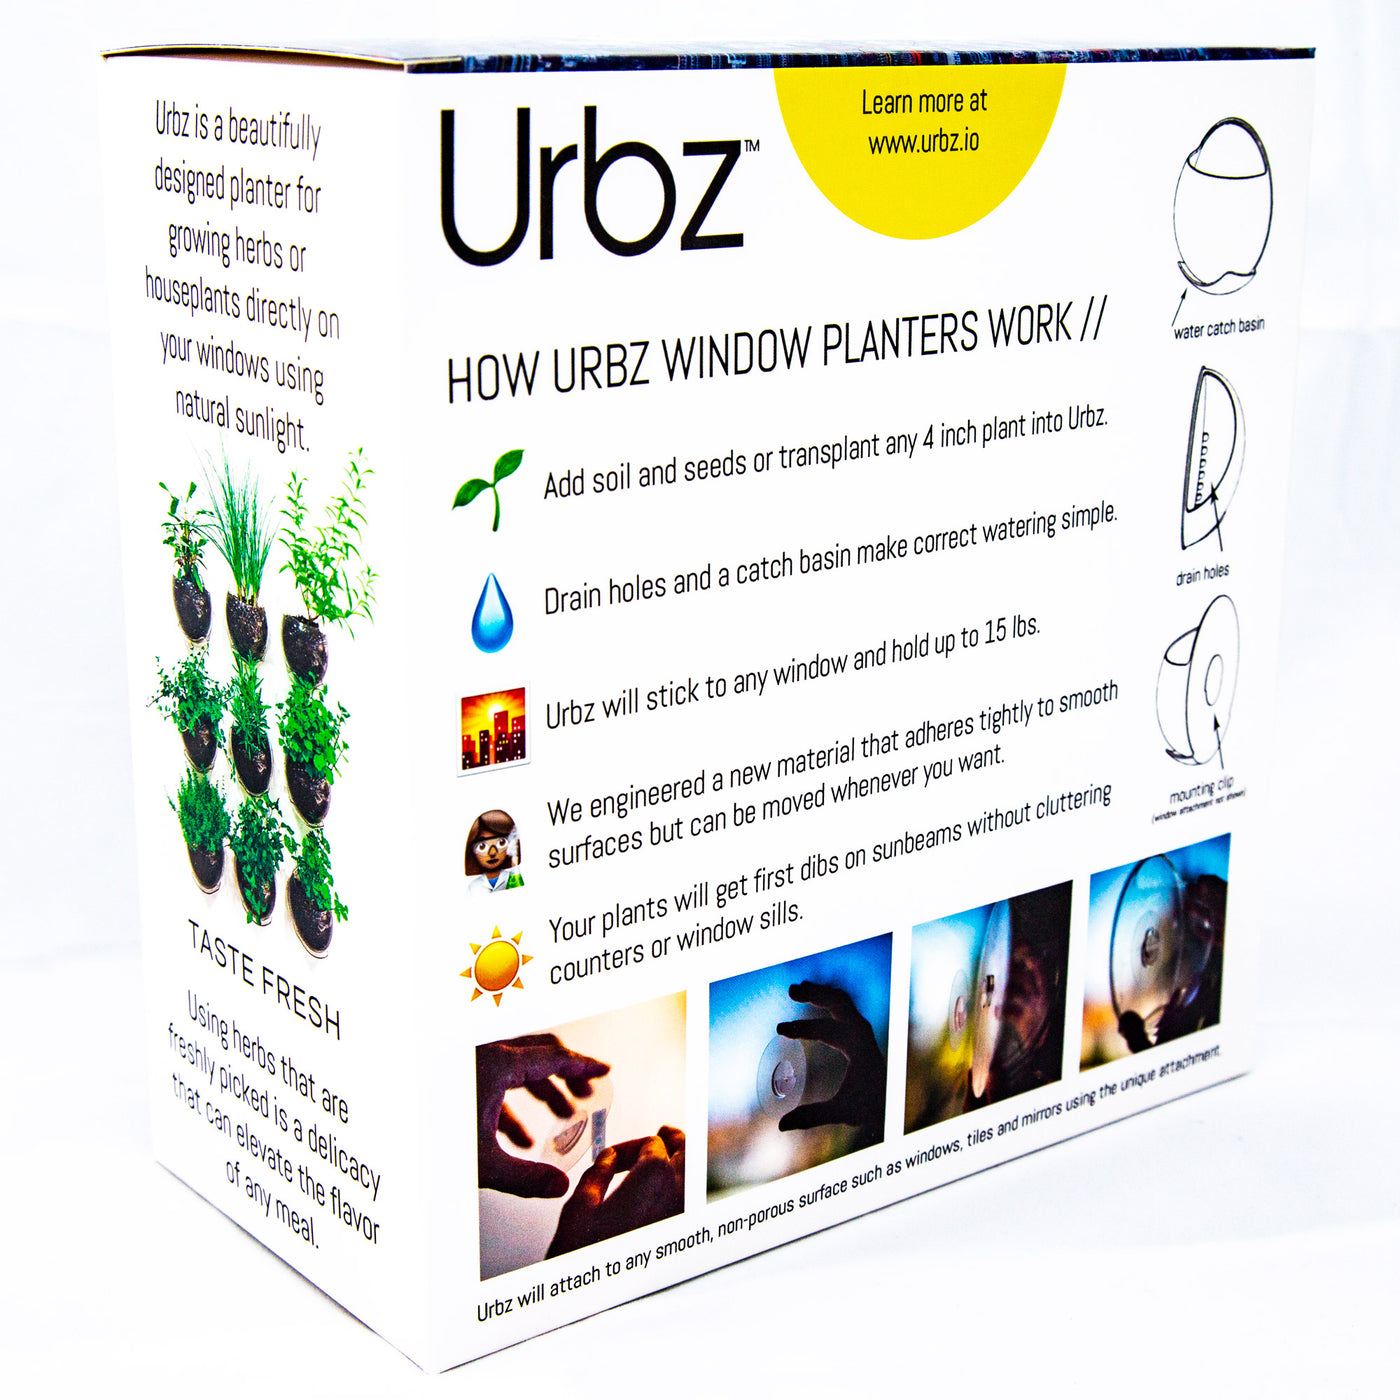 The Urbz plant pod box provides all the details for creating a beautiful indoor garden.